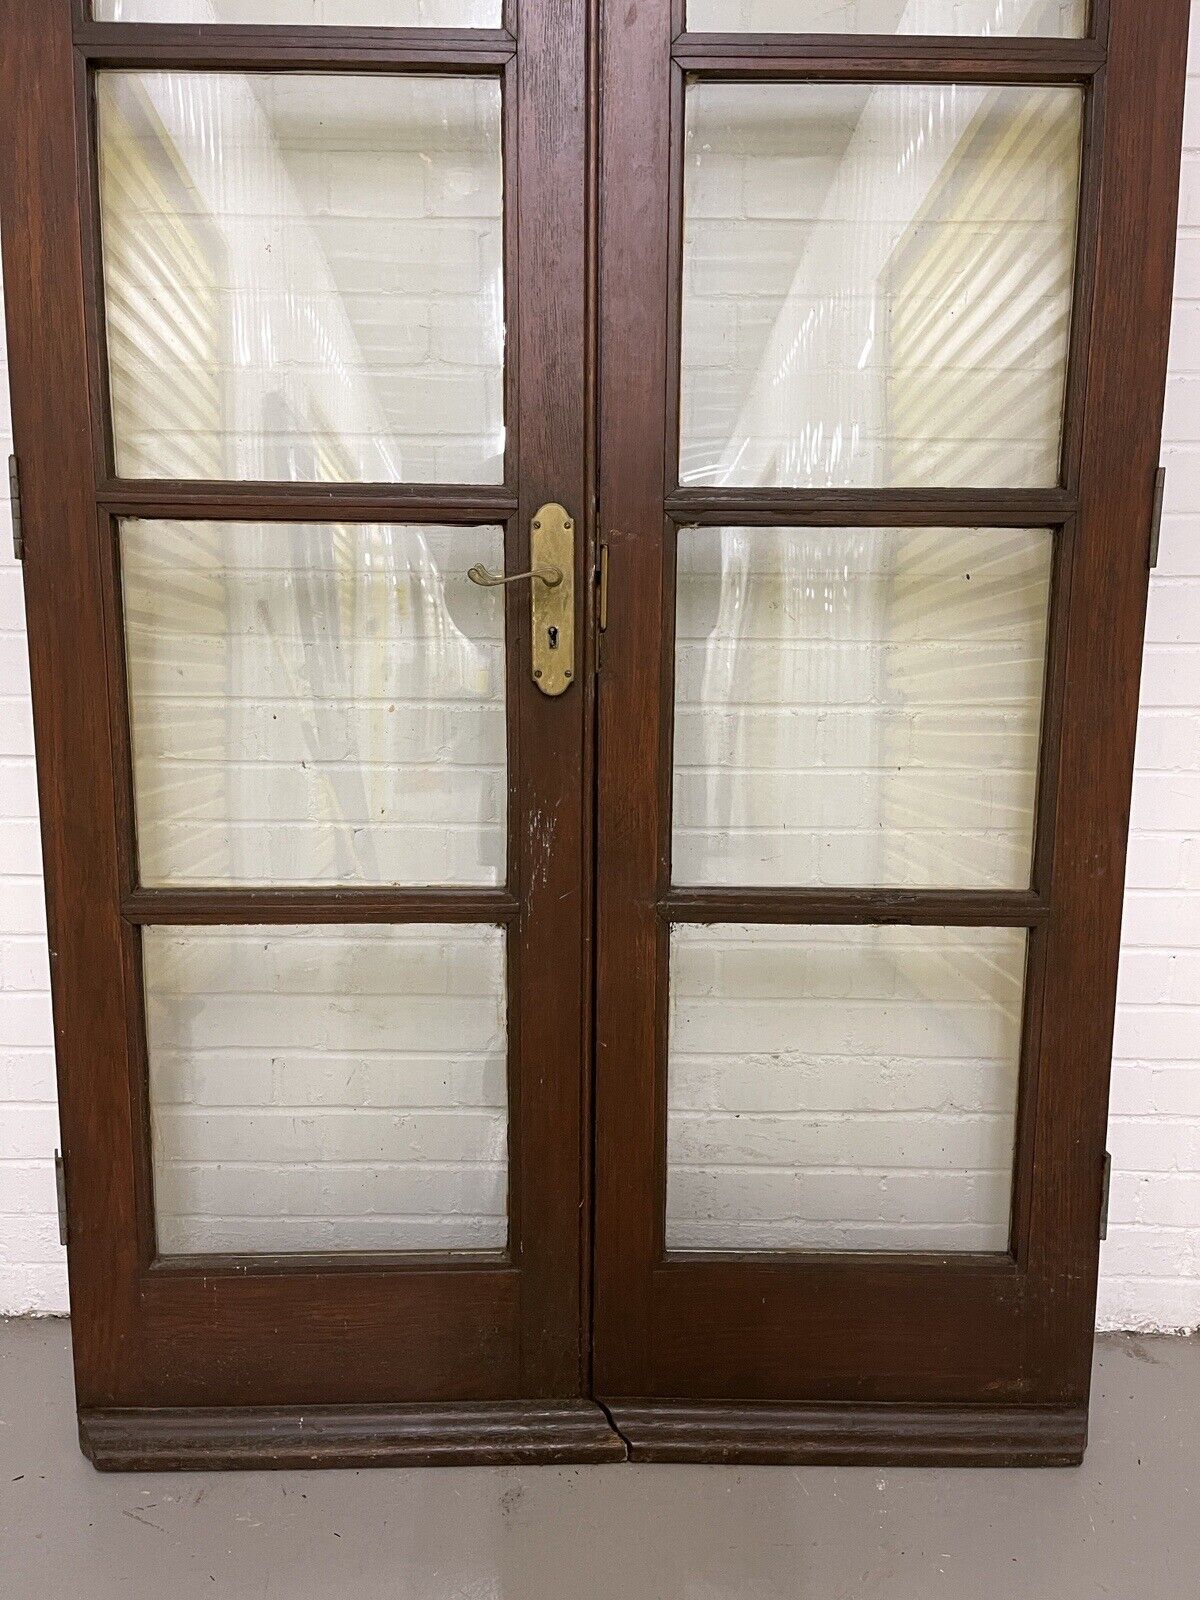 Reclaimed Old French Double Glazed Glass Wooden Double Doors 2025 x 1185mm